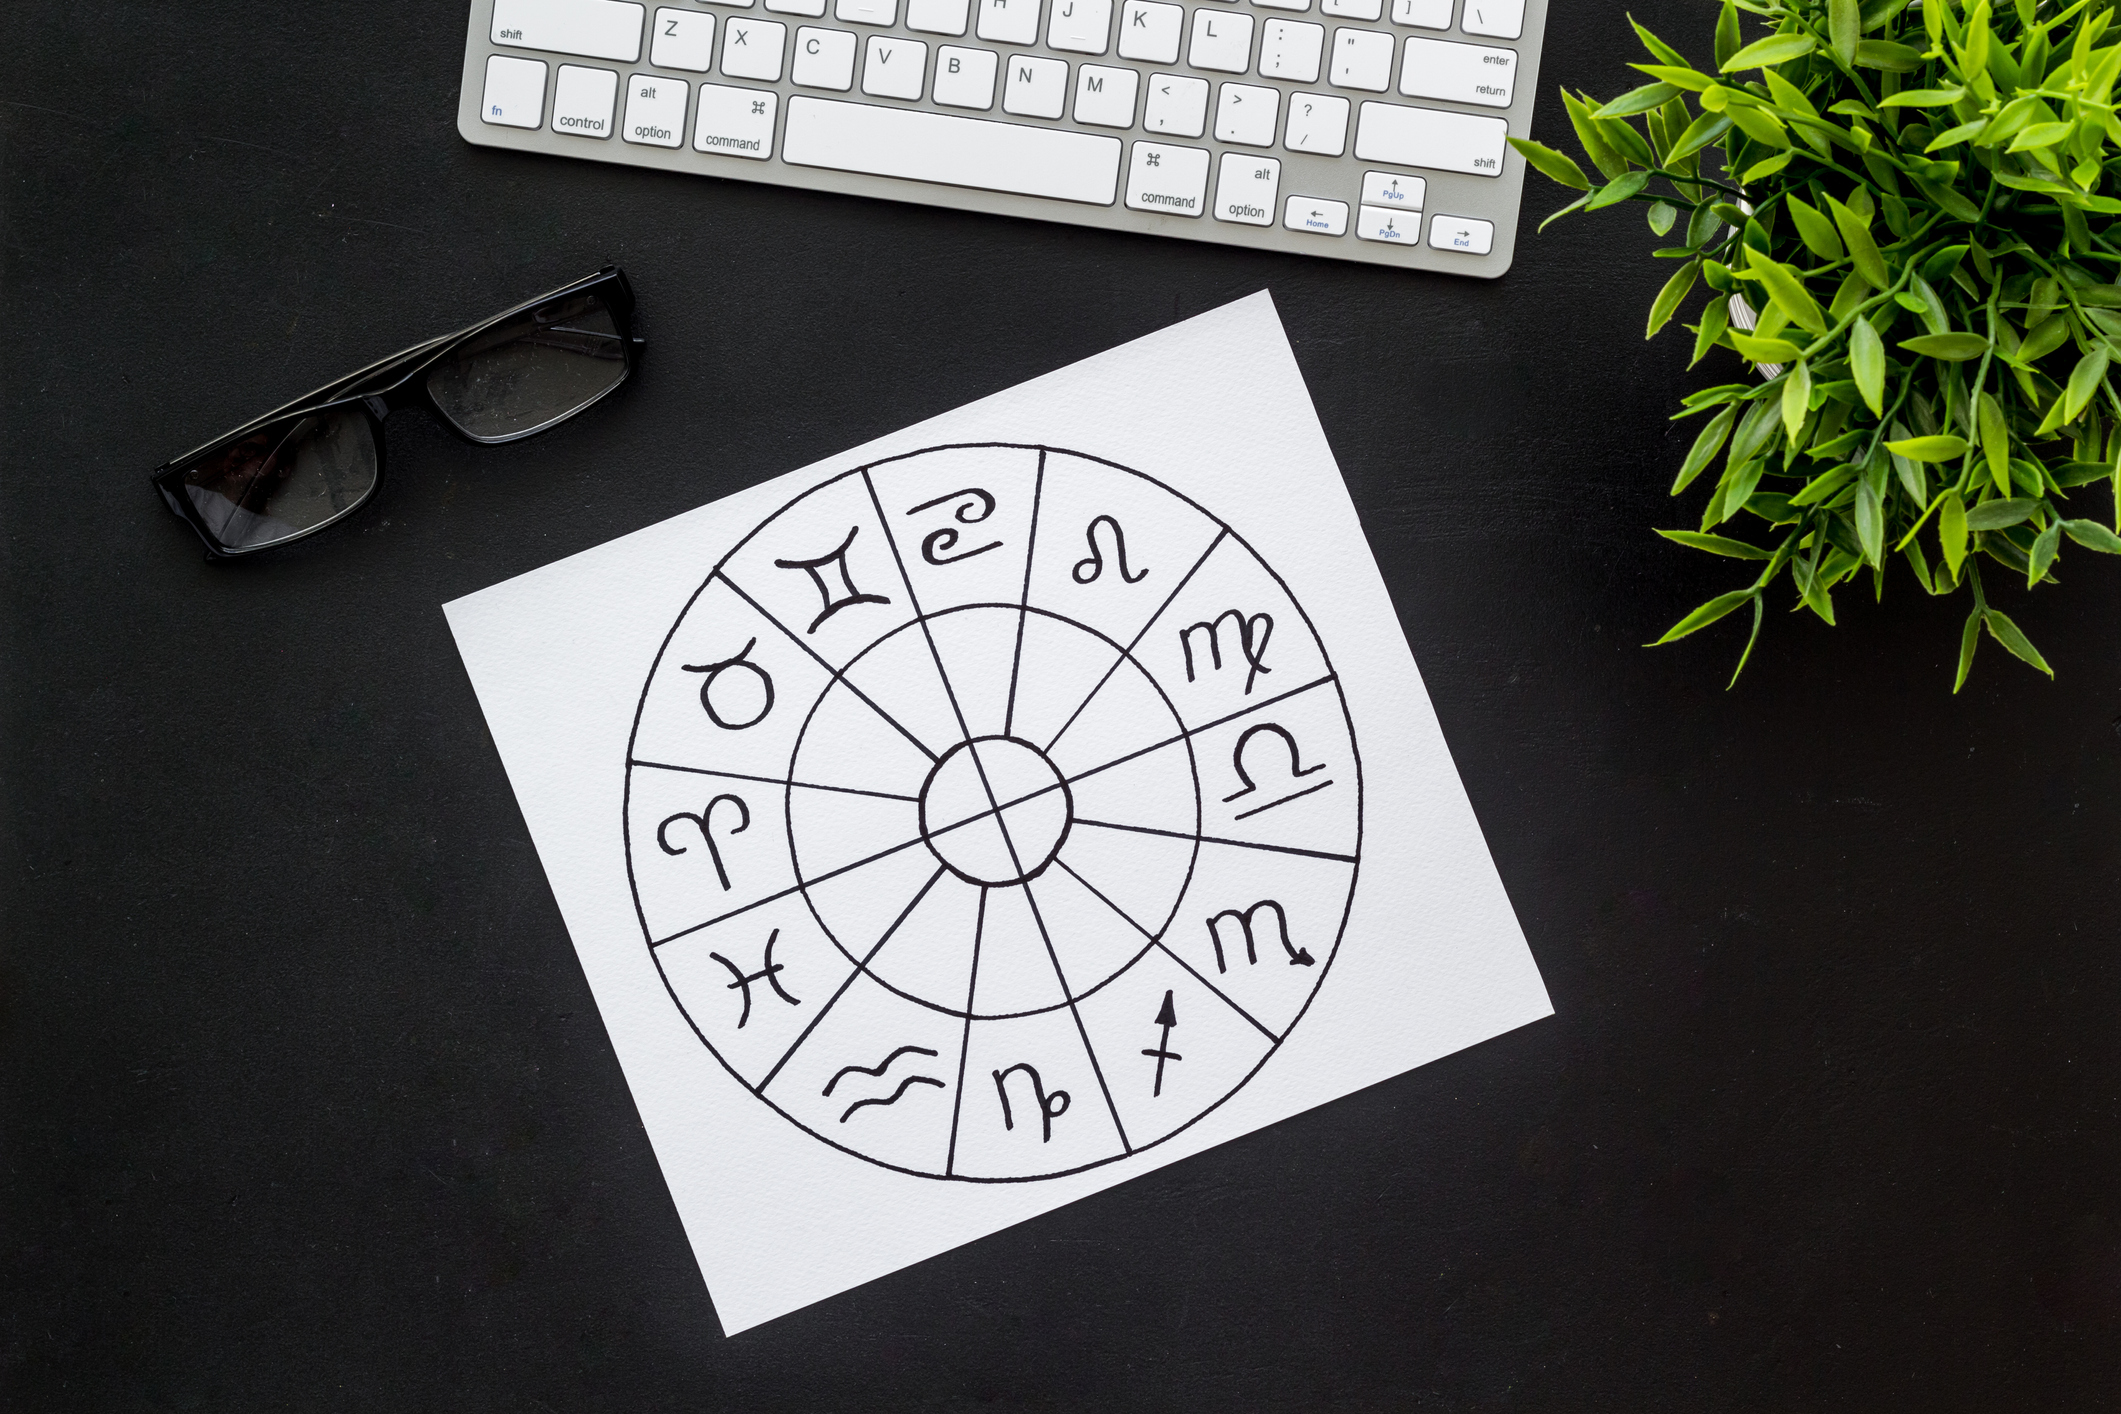 The 12 zodiac signs in a circle on a white piece of paper on a desk